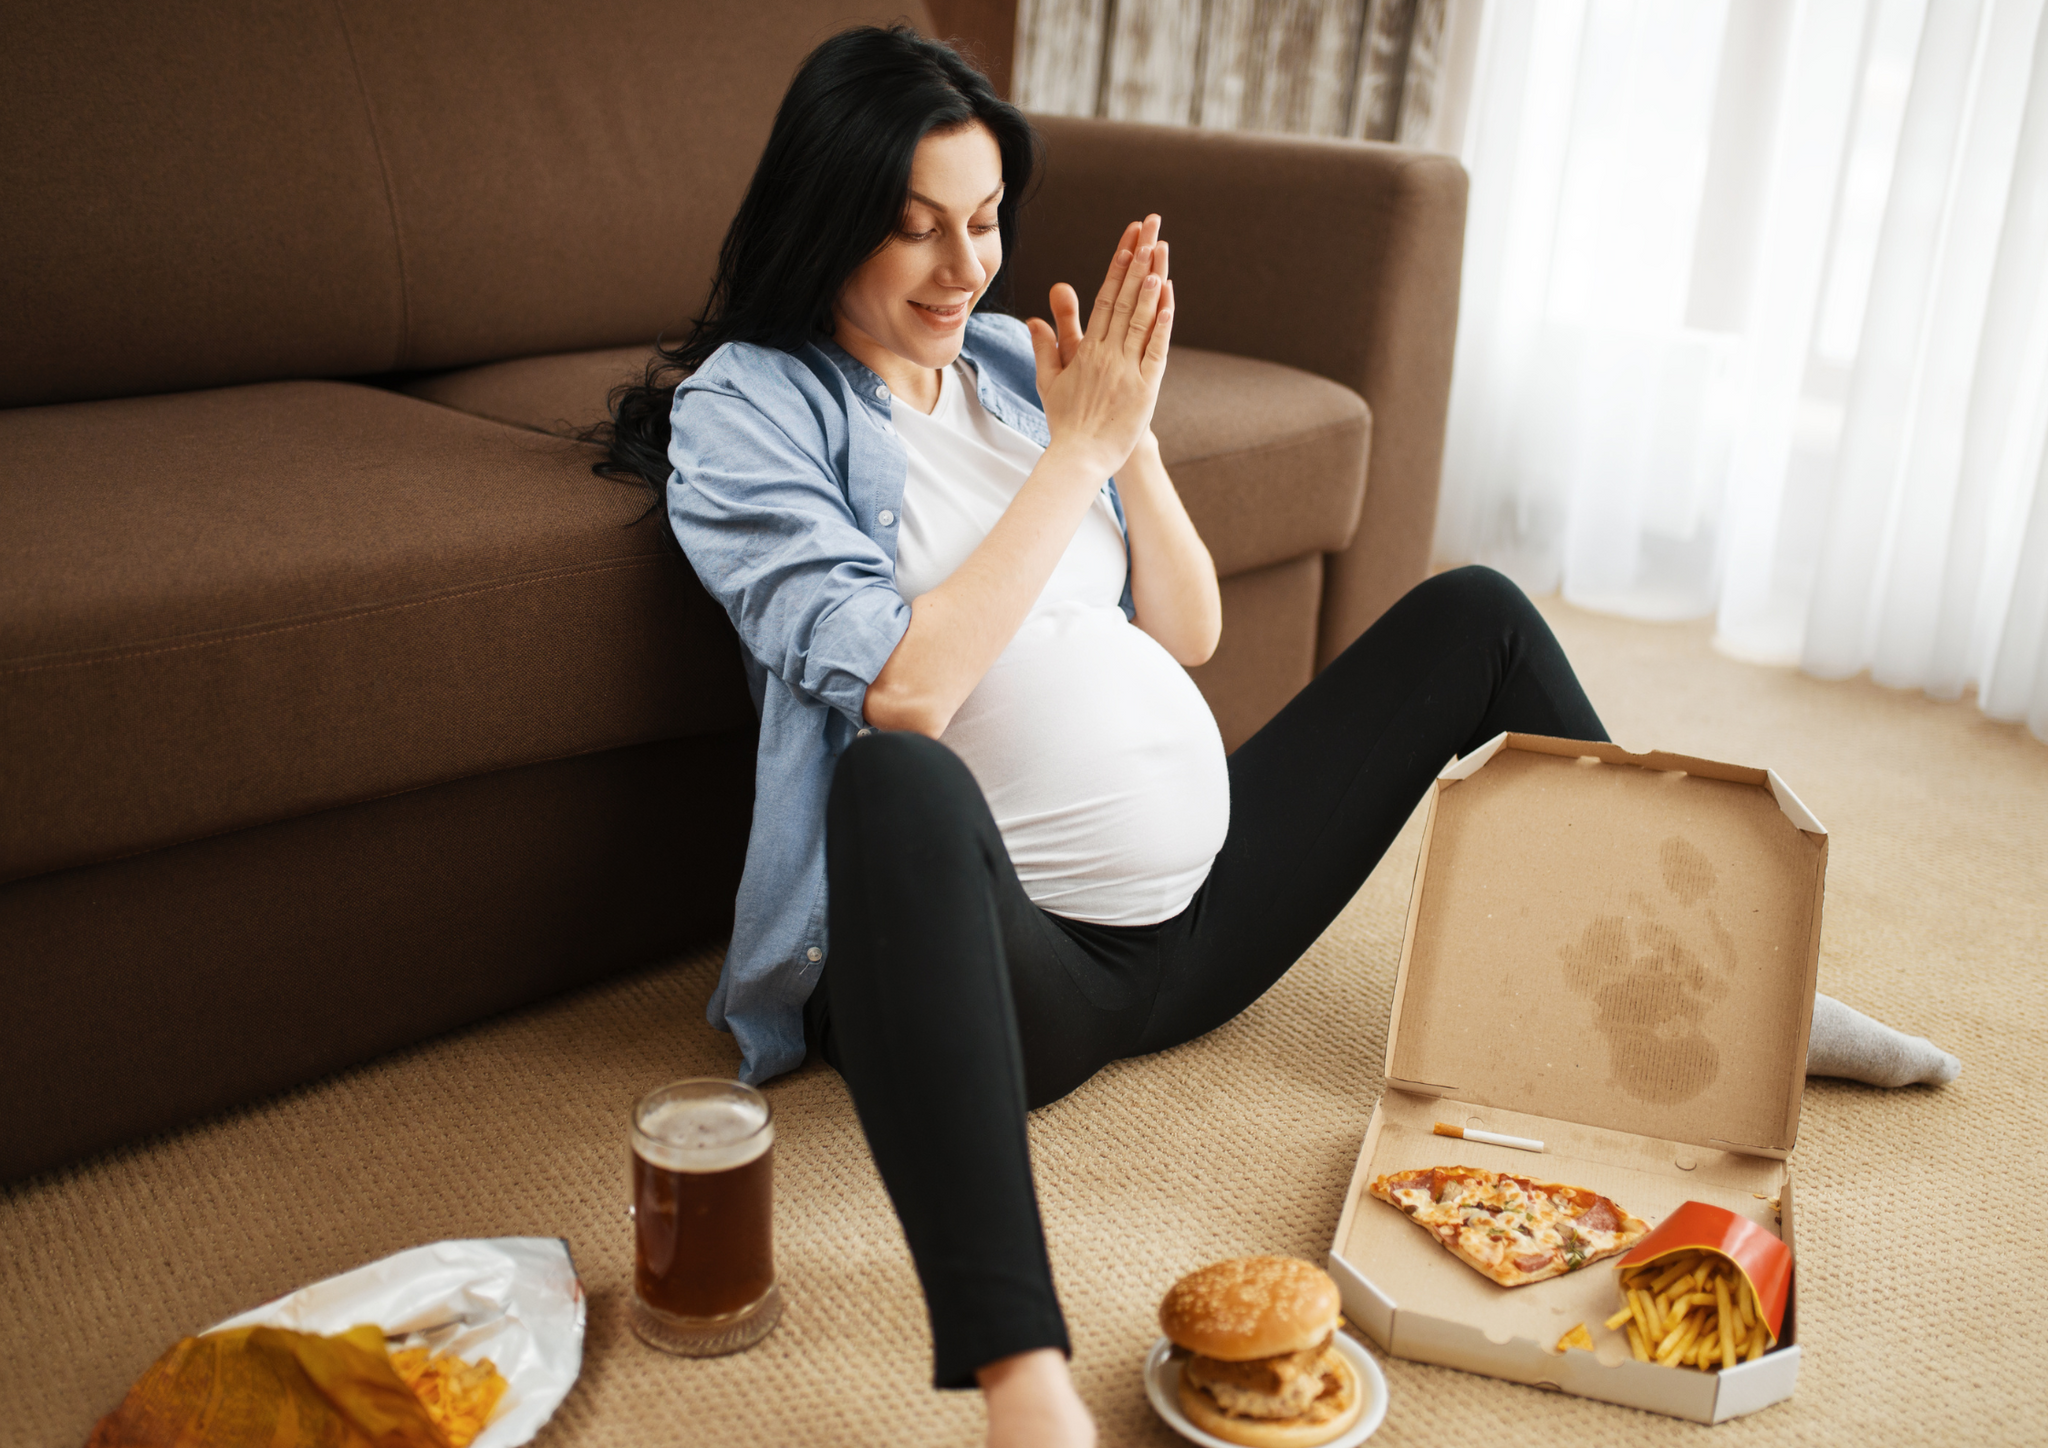 A pregnant lady looking at junk food.